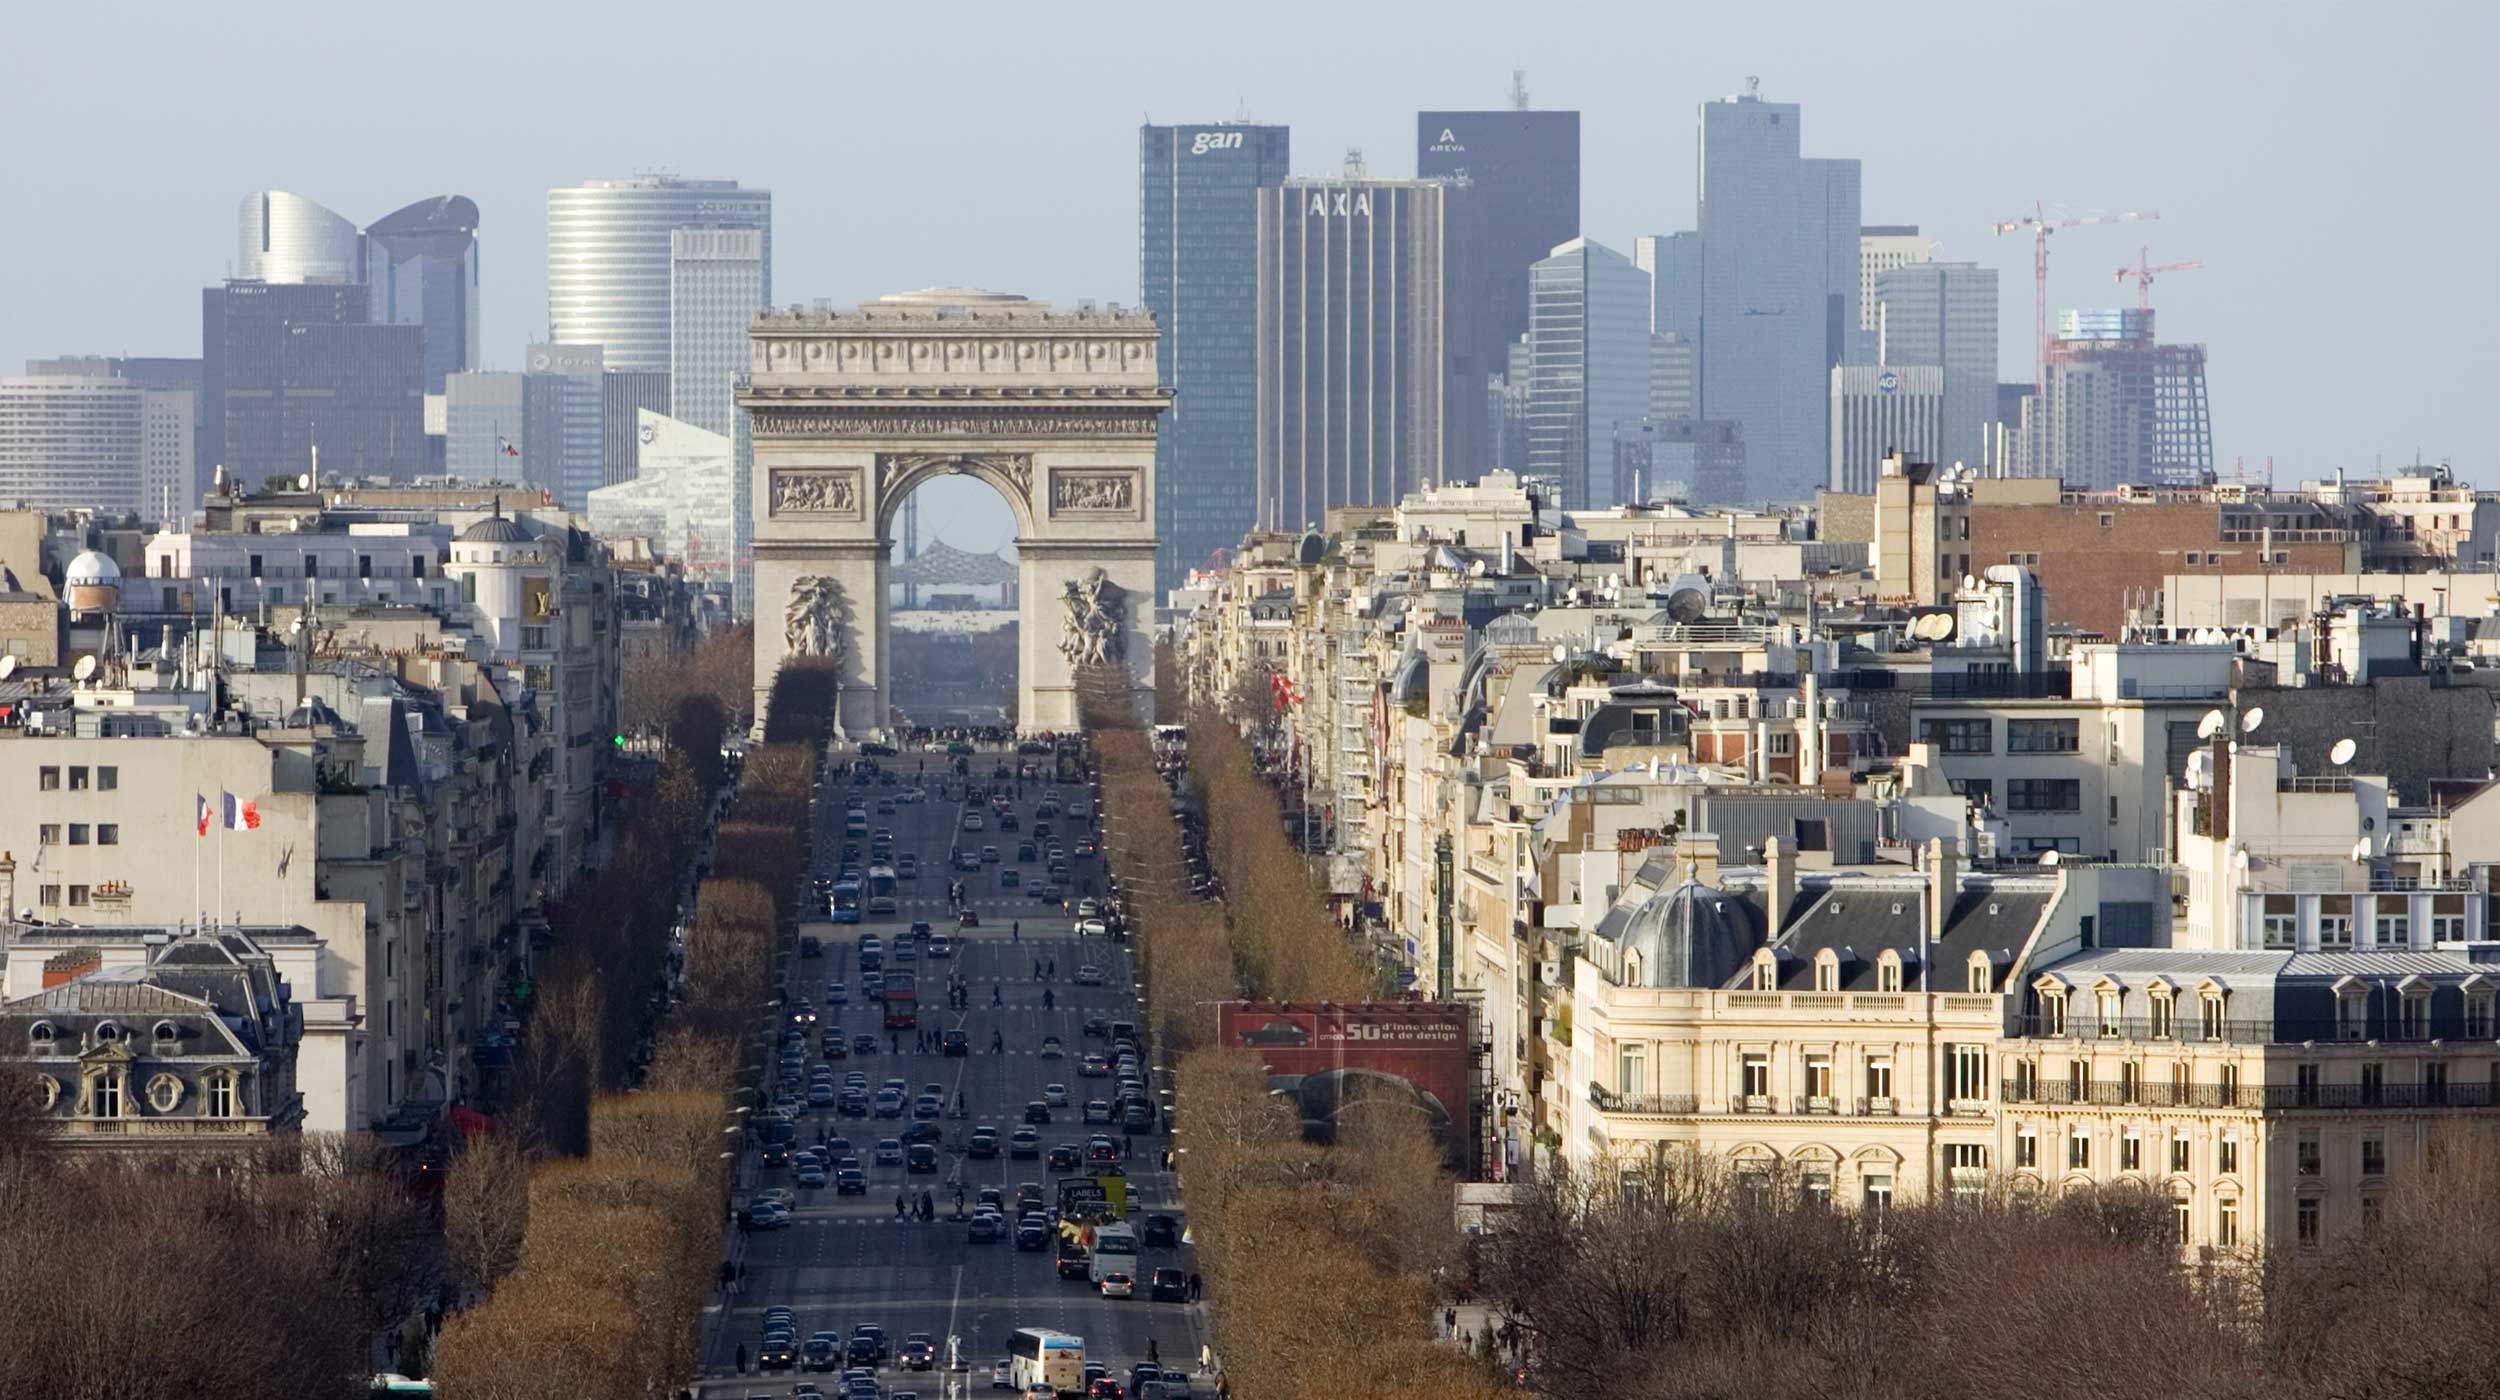 View looking along the Avenue Champs-Elysees and the Arc de Triomphe, Paris, France